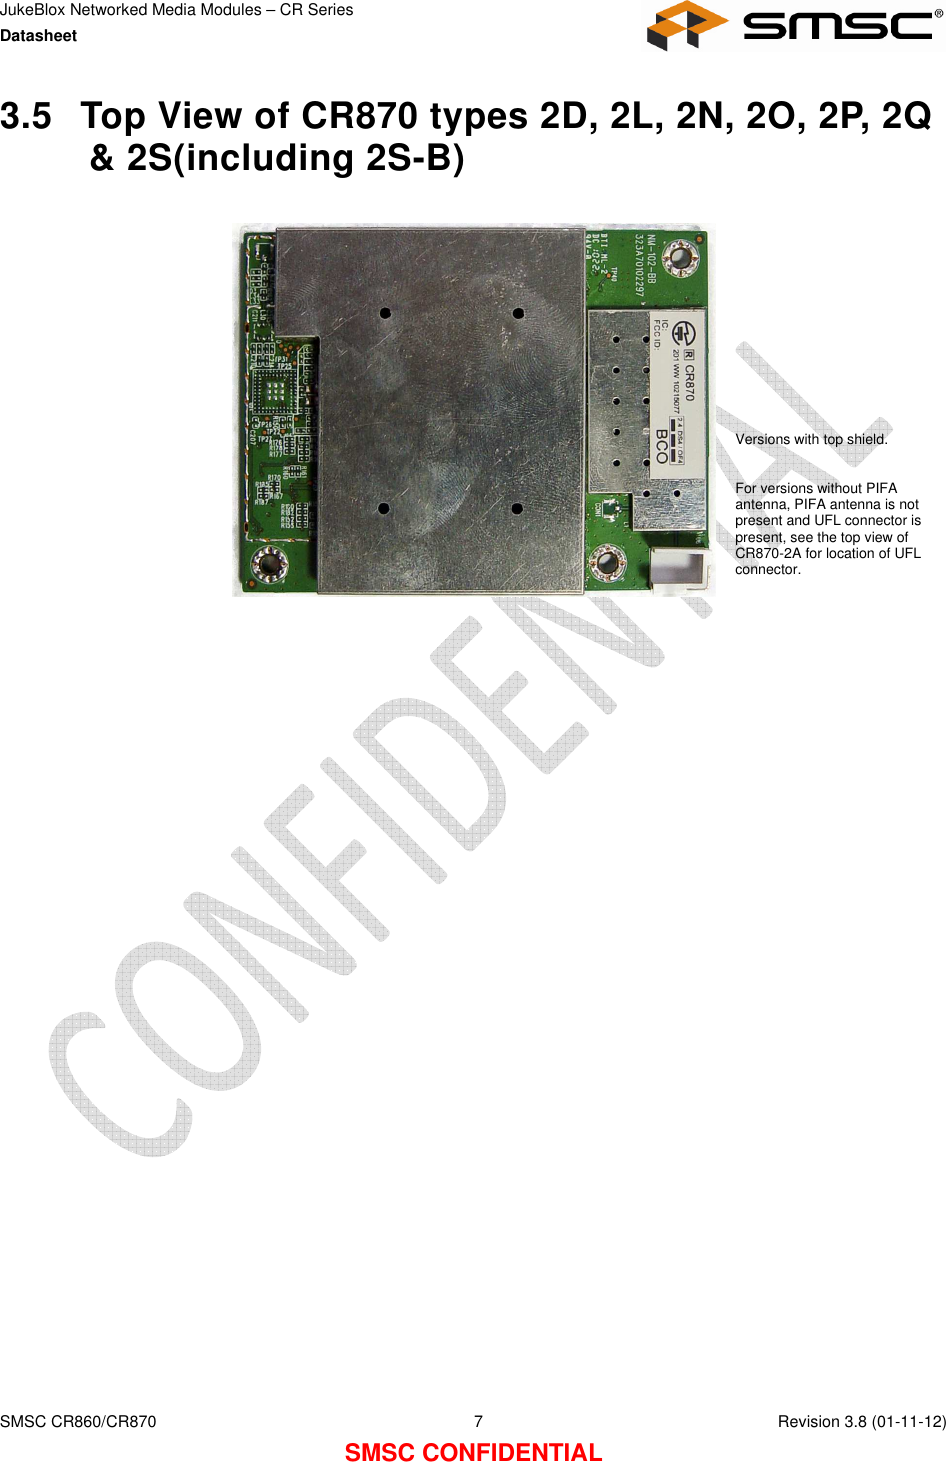 JukeBlox Networked Media Modules – CR Series Datasheet    SMSC CR860/CR870  7    Revision 3.8 (01-11-12) SMSC CONFIDENTIAL 3.5  Top View of CR870 types 2D, 2L, 2N, 2O, 2P, 2Q &amp; 2S(including 2S-B)      Versions with top shield.  For versions without PIFA antenna, PIFA antenna is not present and UFL connector is present, see the top view of CR870-2A for location of UFL connector. 